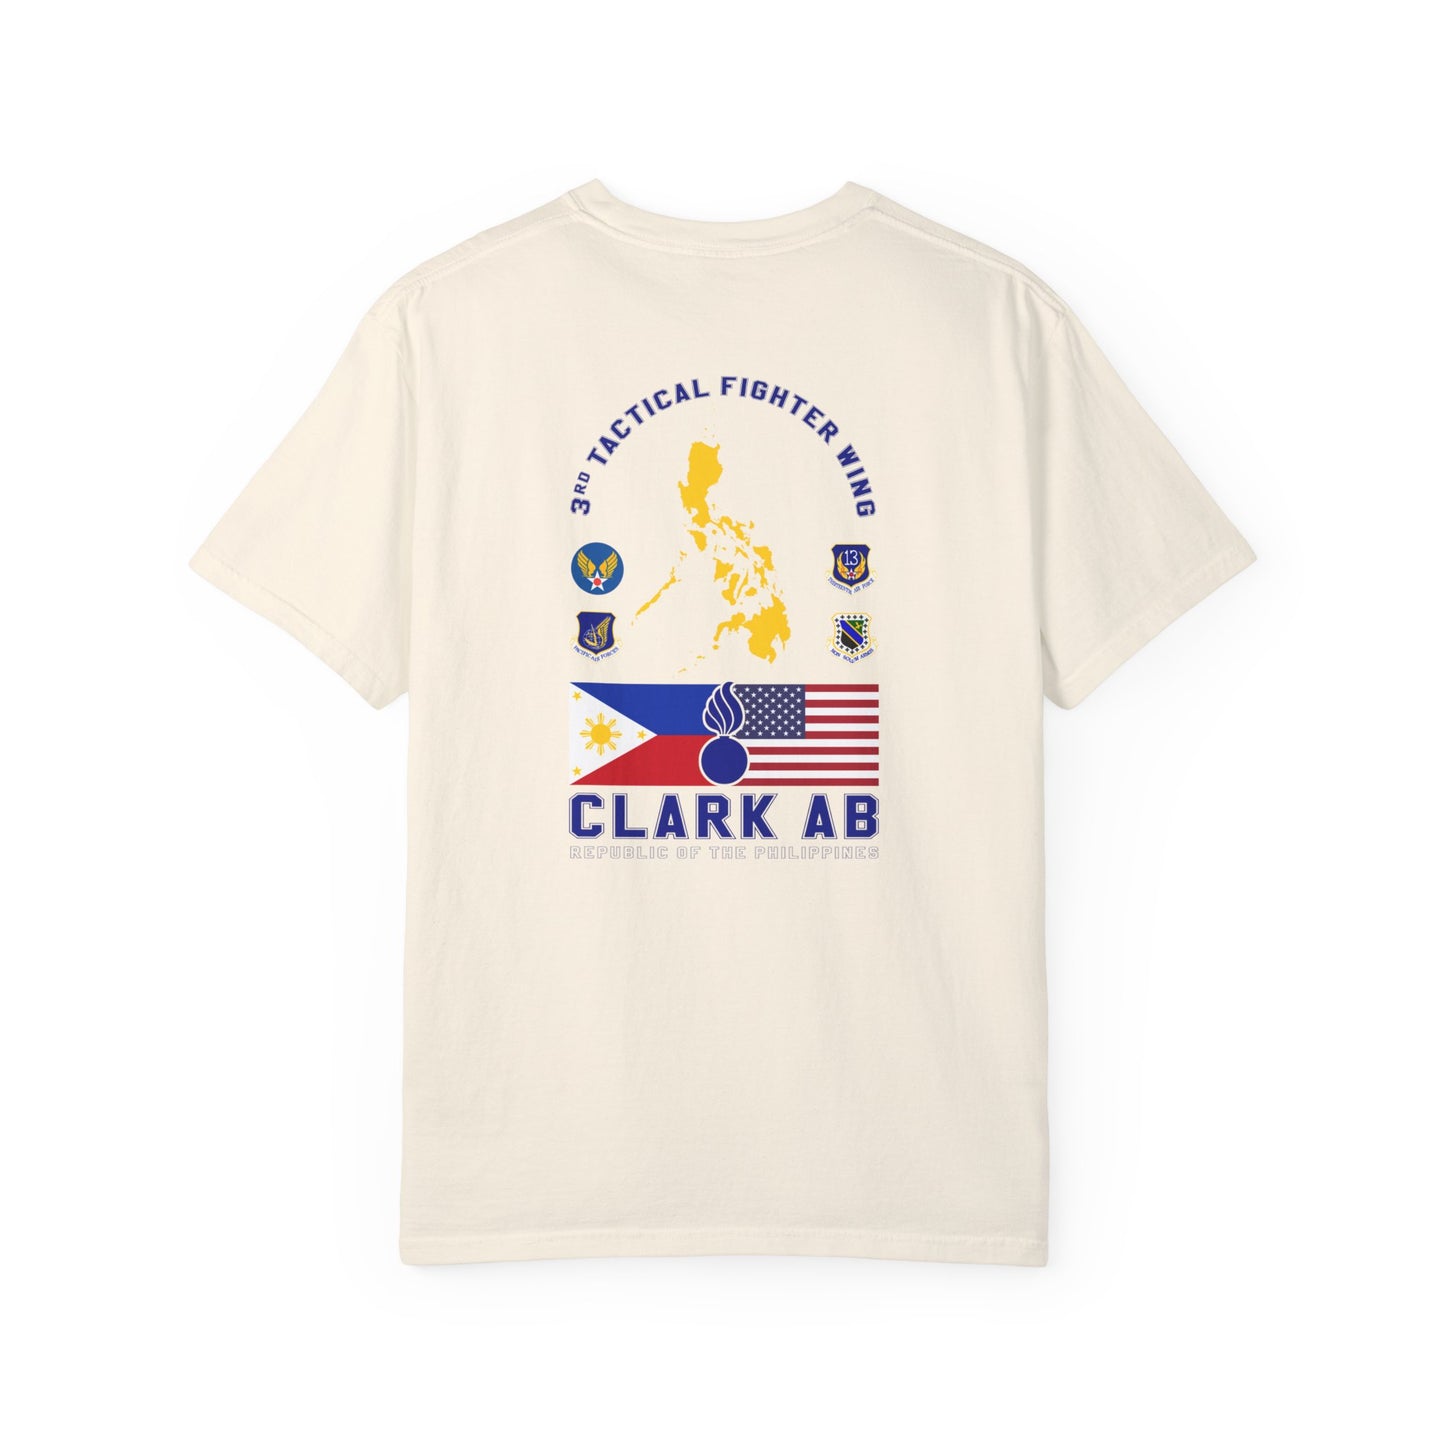 Clark AB AMMO Shirt With Patches Unisex Garment-Dyed T-shirt